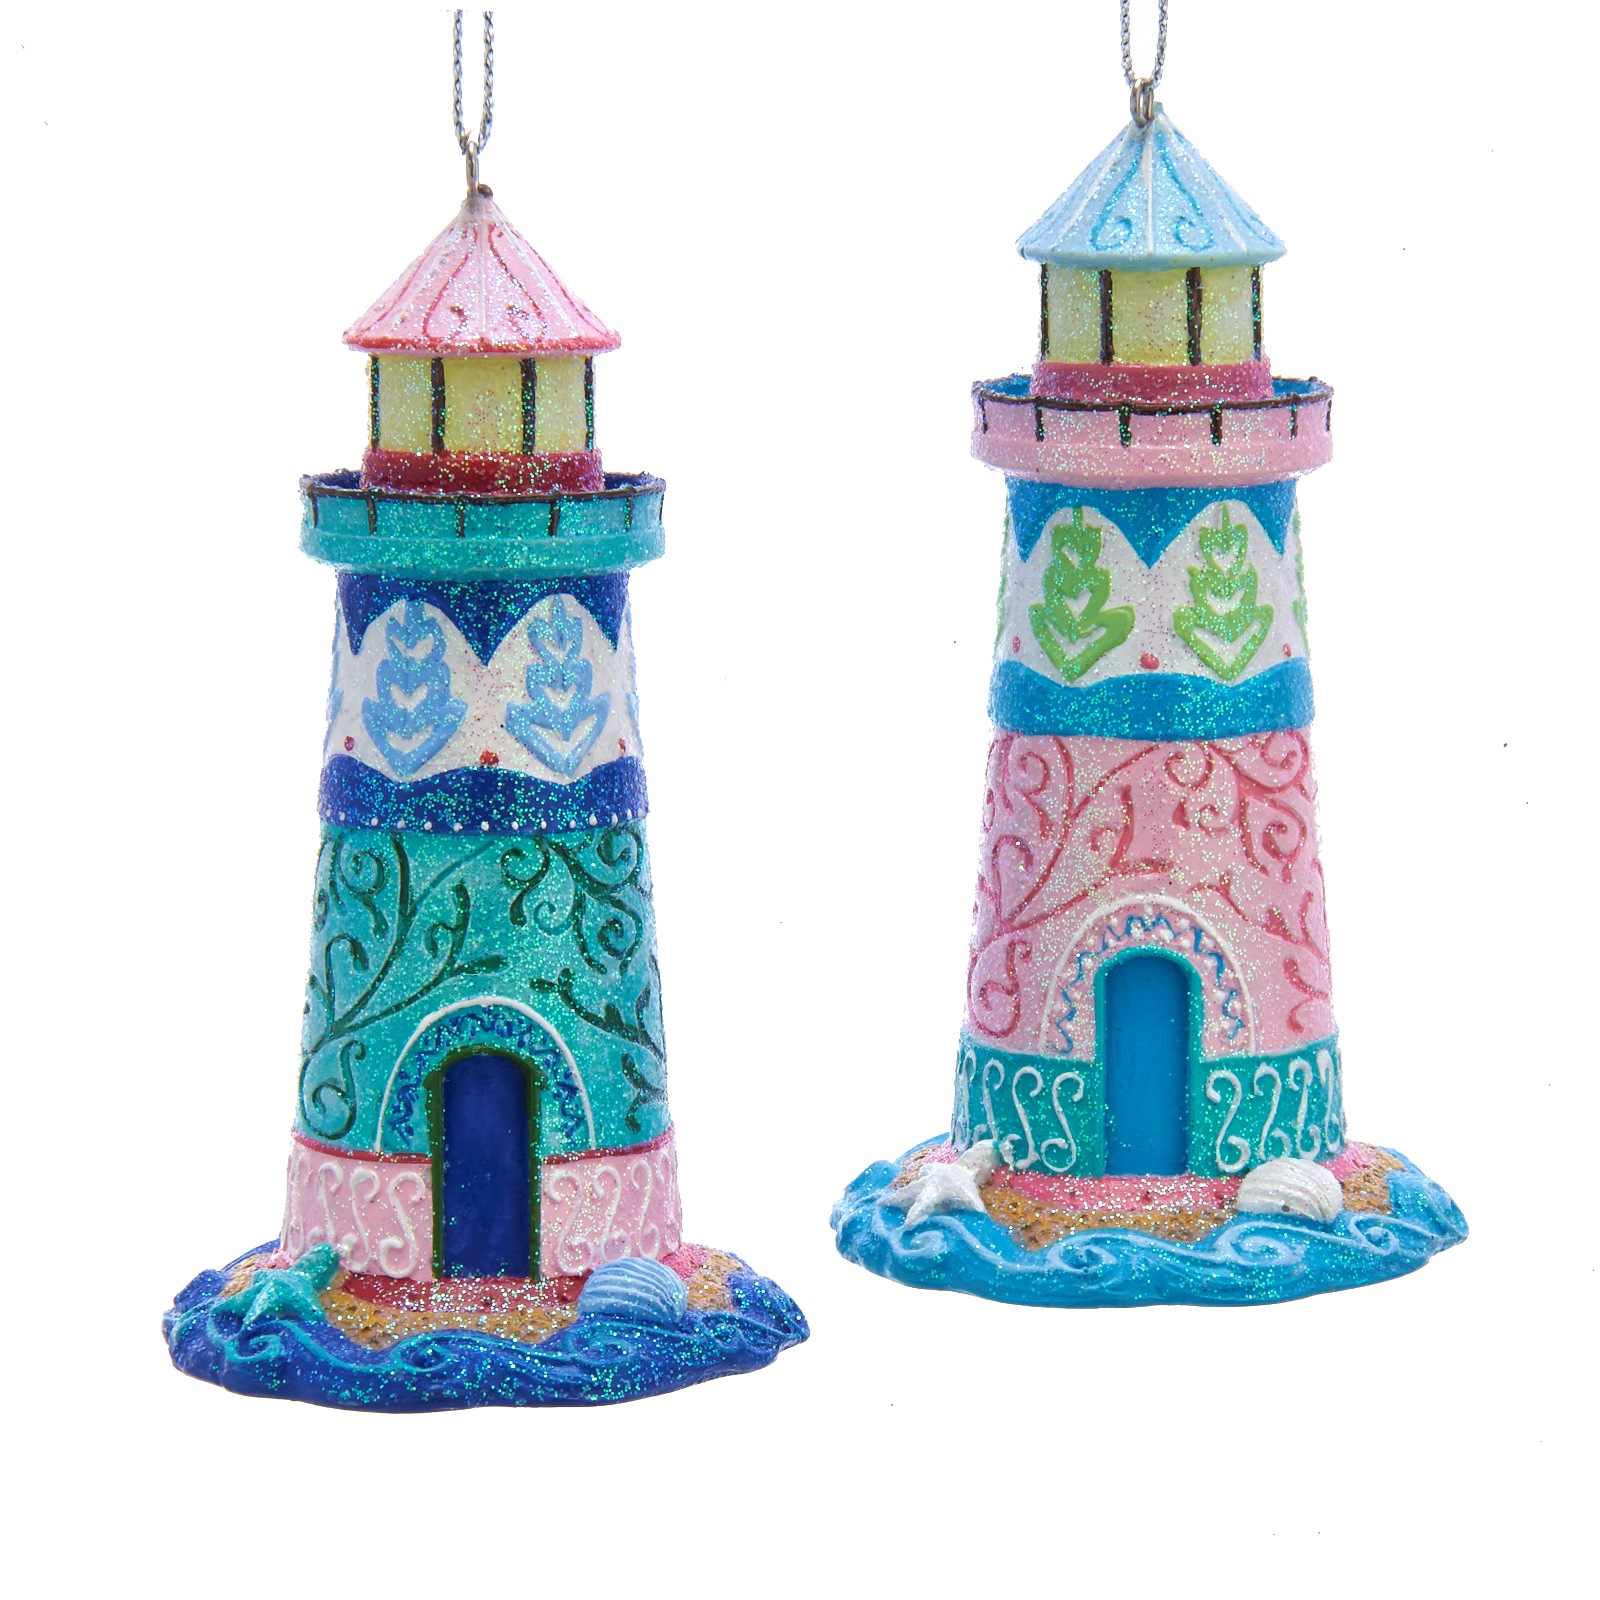 Pink and Blue Ocean Fantasy Lighthouses Christmas Holiday Ornaments Set of 2 - image 1 of 1